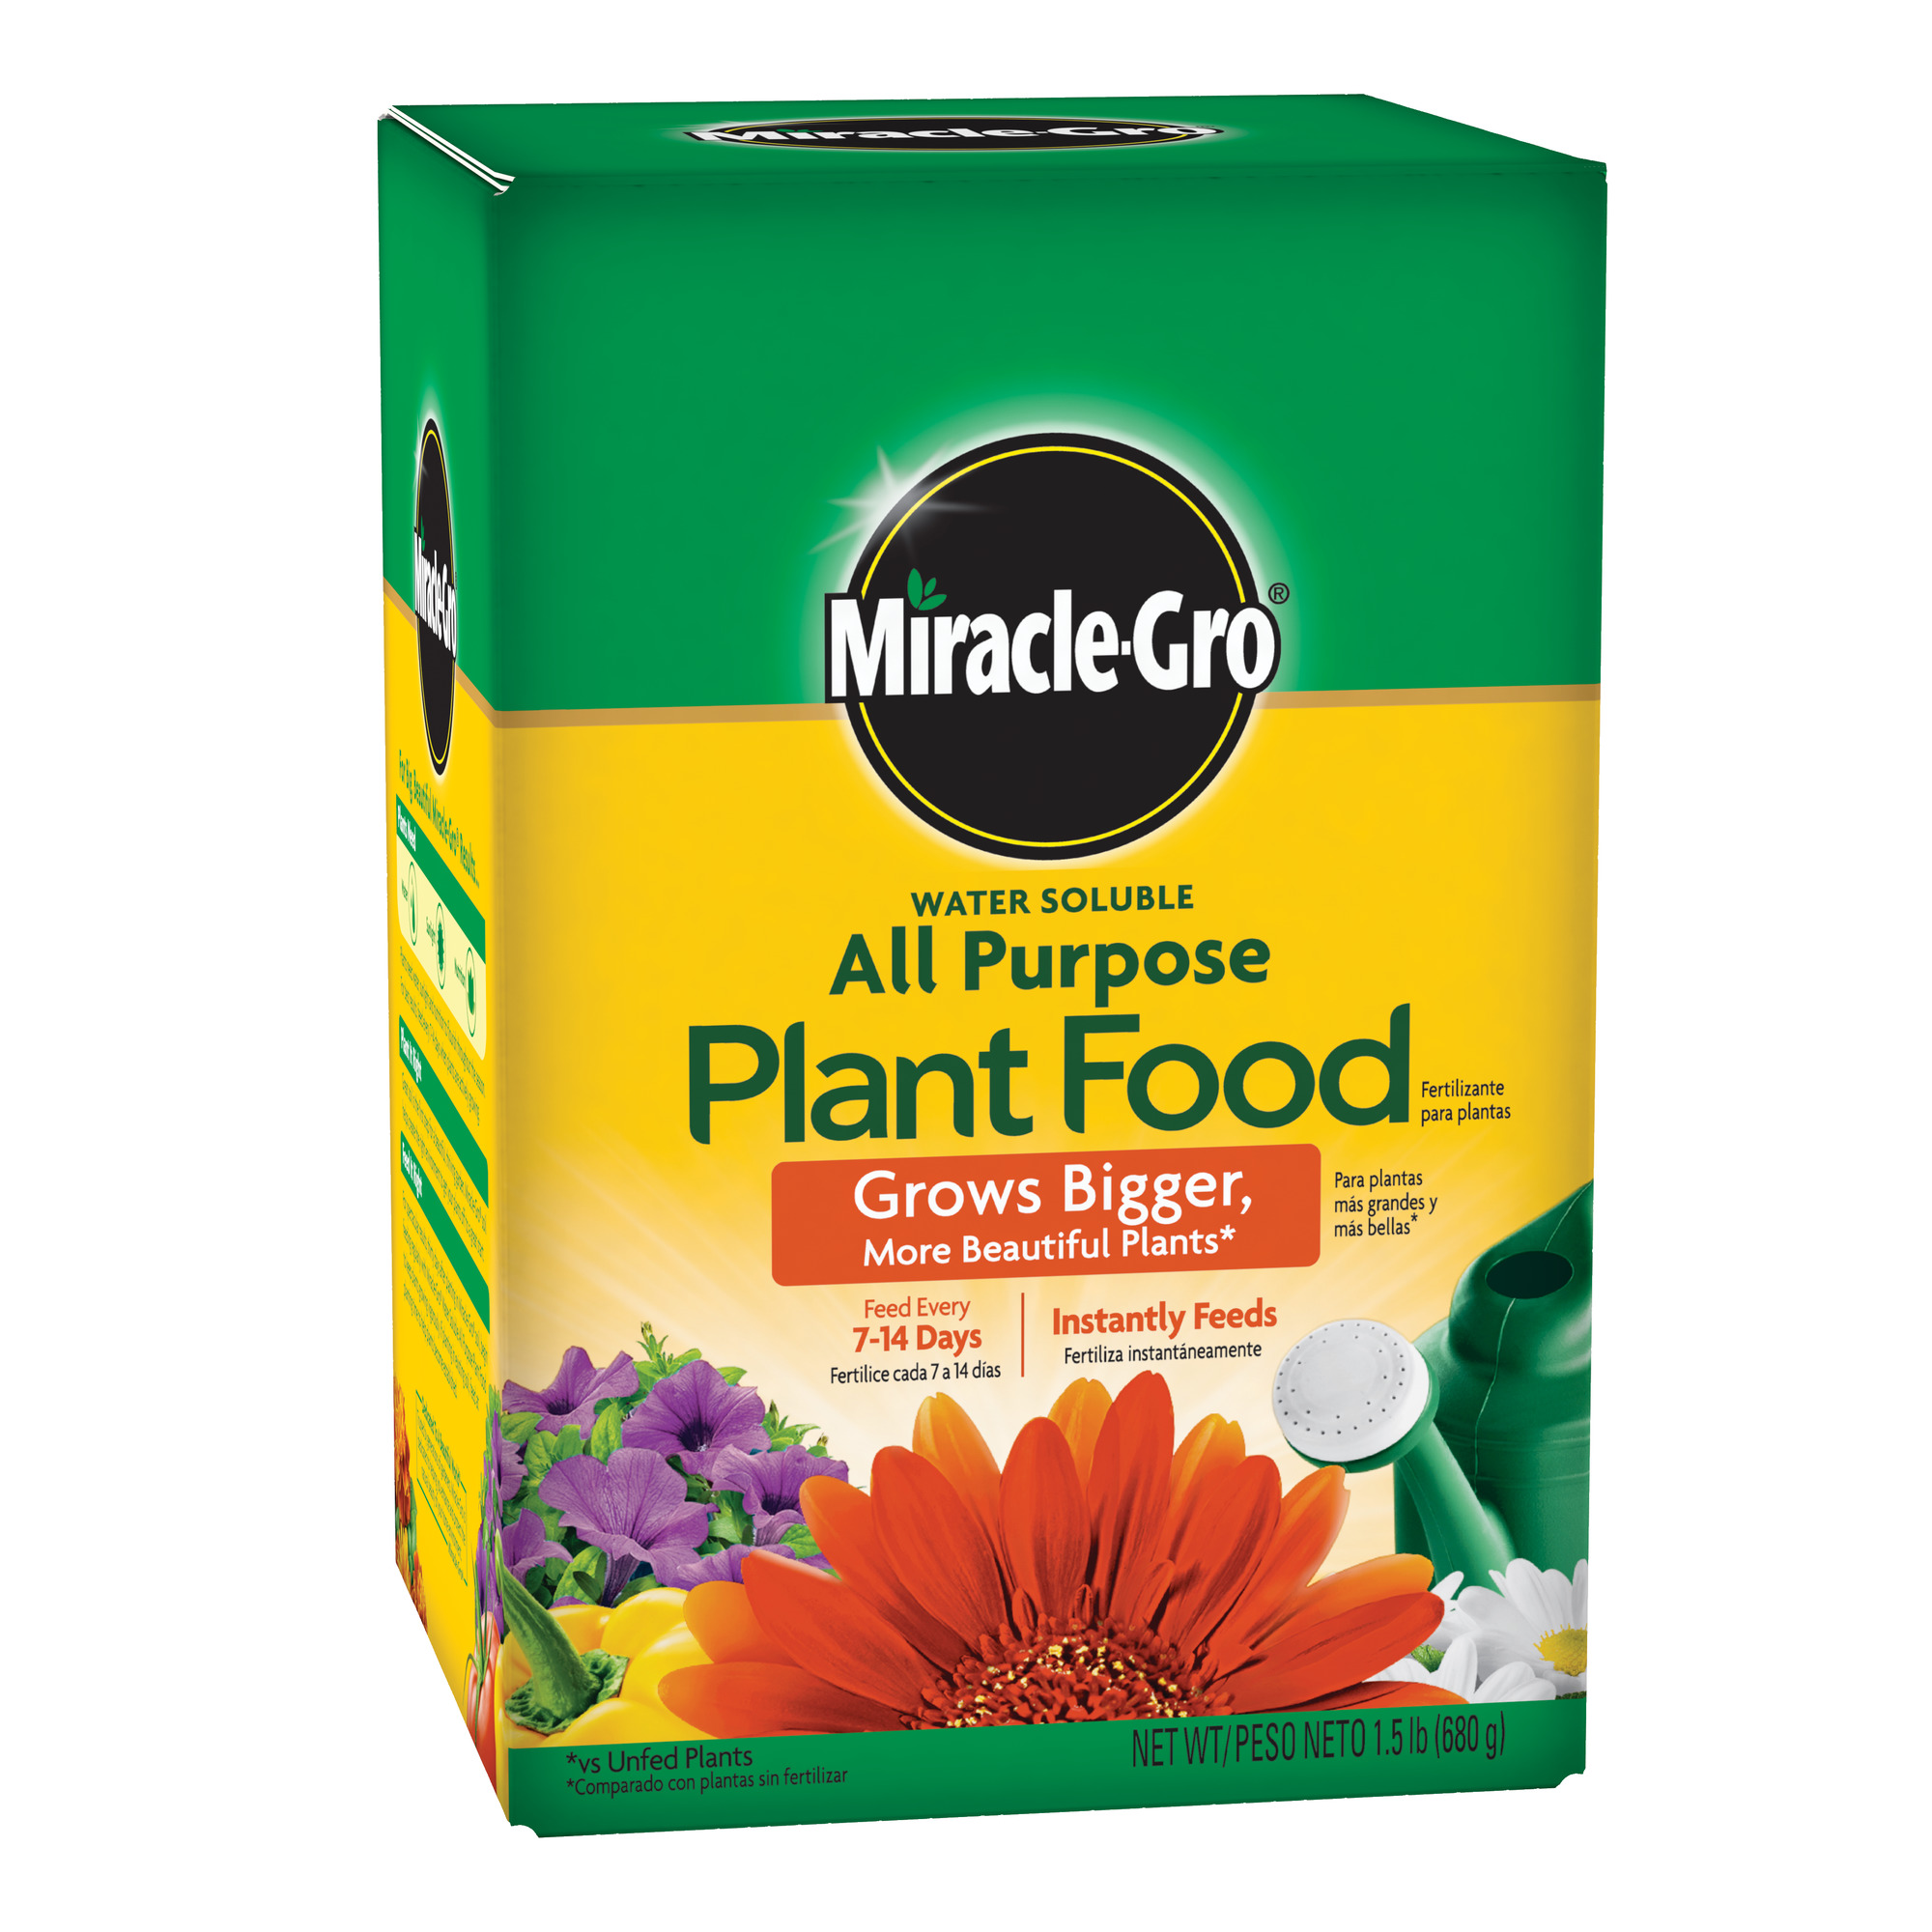 Miracle-Gro Water Soluble All Purpose Plant Food, 1.5 lbs., Safe for All Plants - image 1 of 16